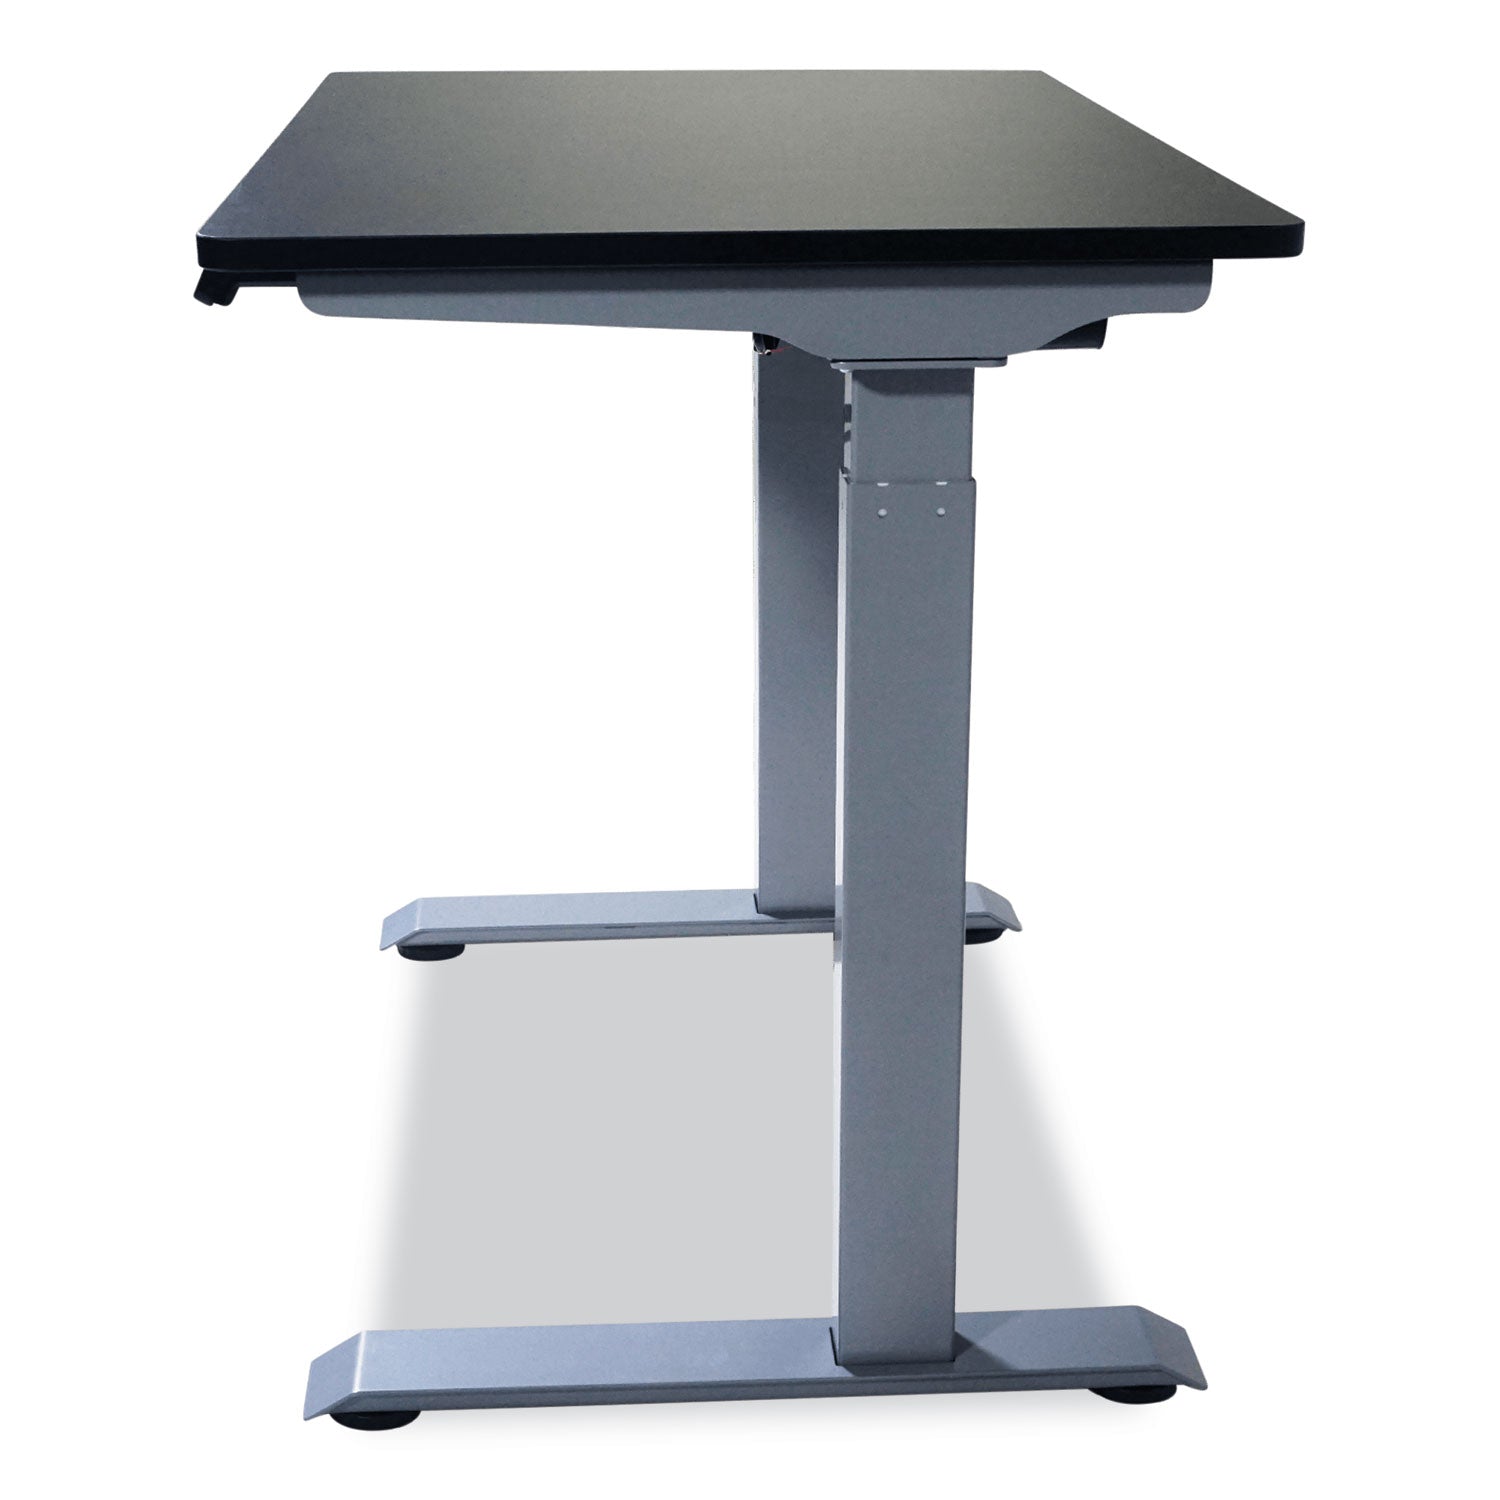 electric-height-adjustable-standing-desk-36-x-236-x-287-to-484-black-ships-in-1-3-business-days_vctdc830b - 1